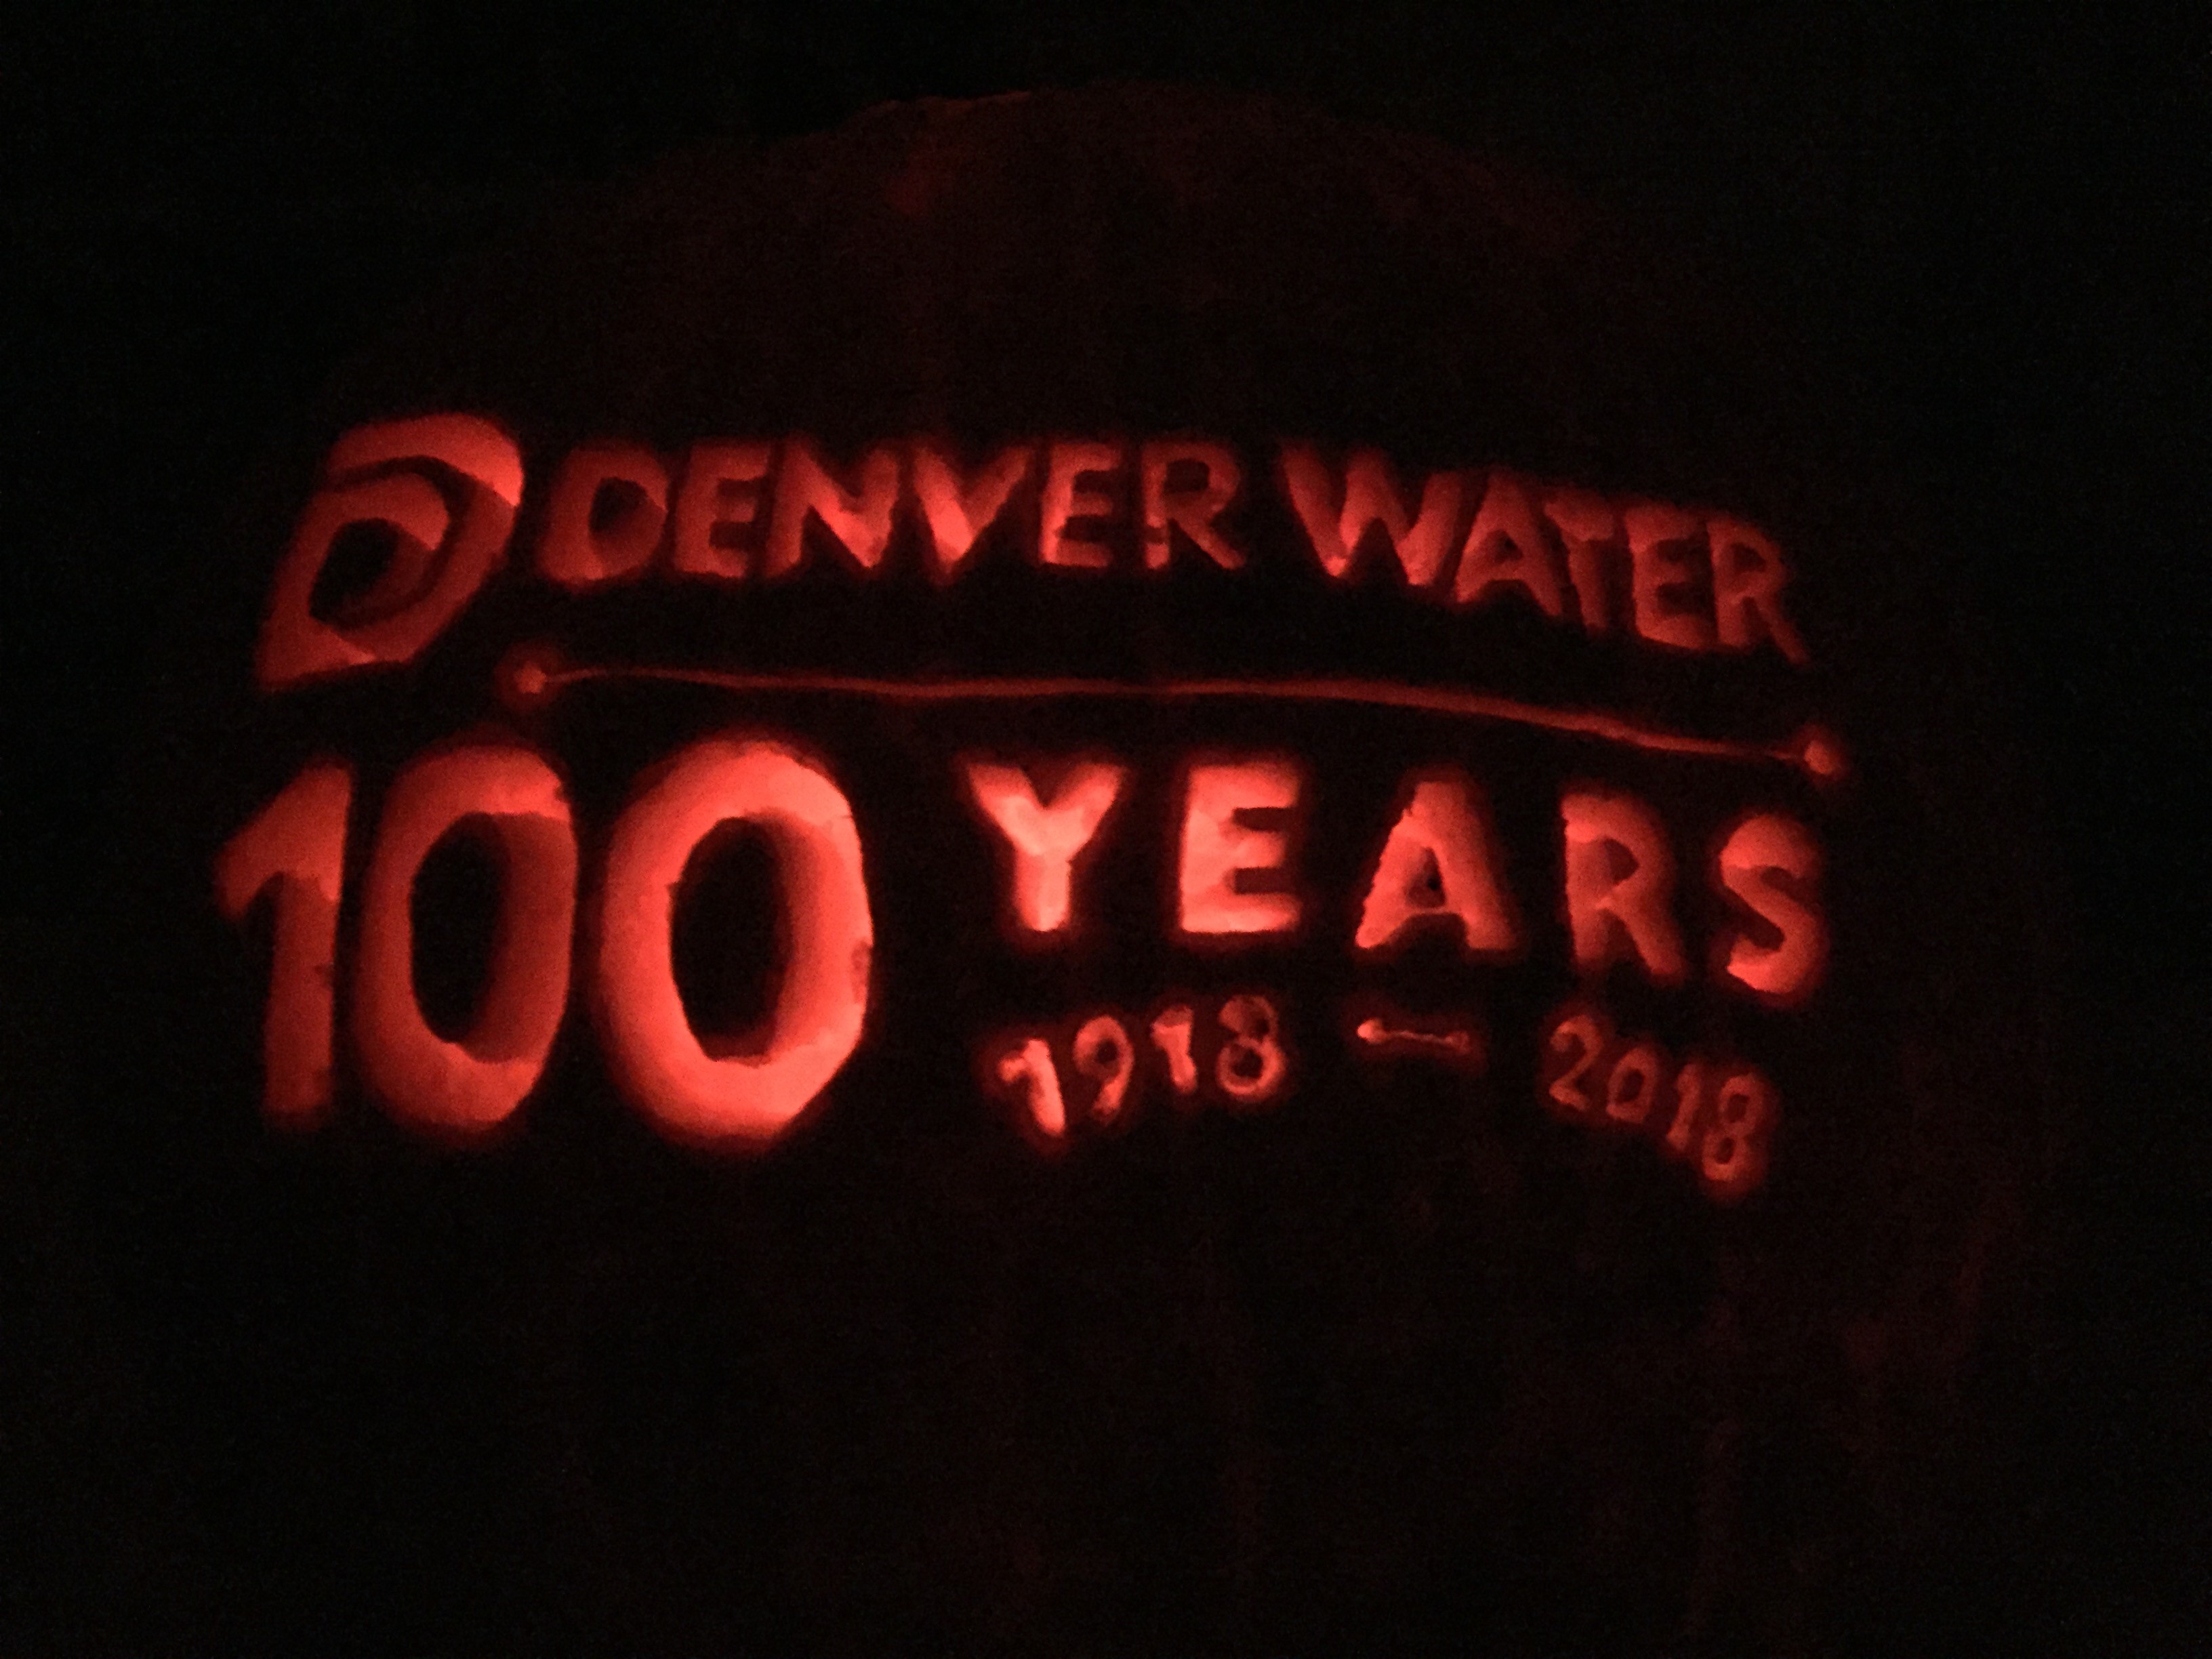 This is what Kim Unger's 2018 pumpkin, celebrating Denver Water's 100th anniversary, looks like when lit from within.